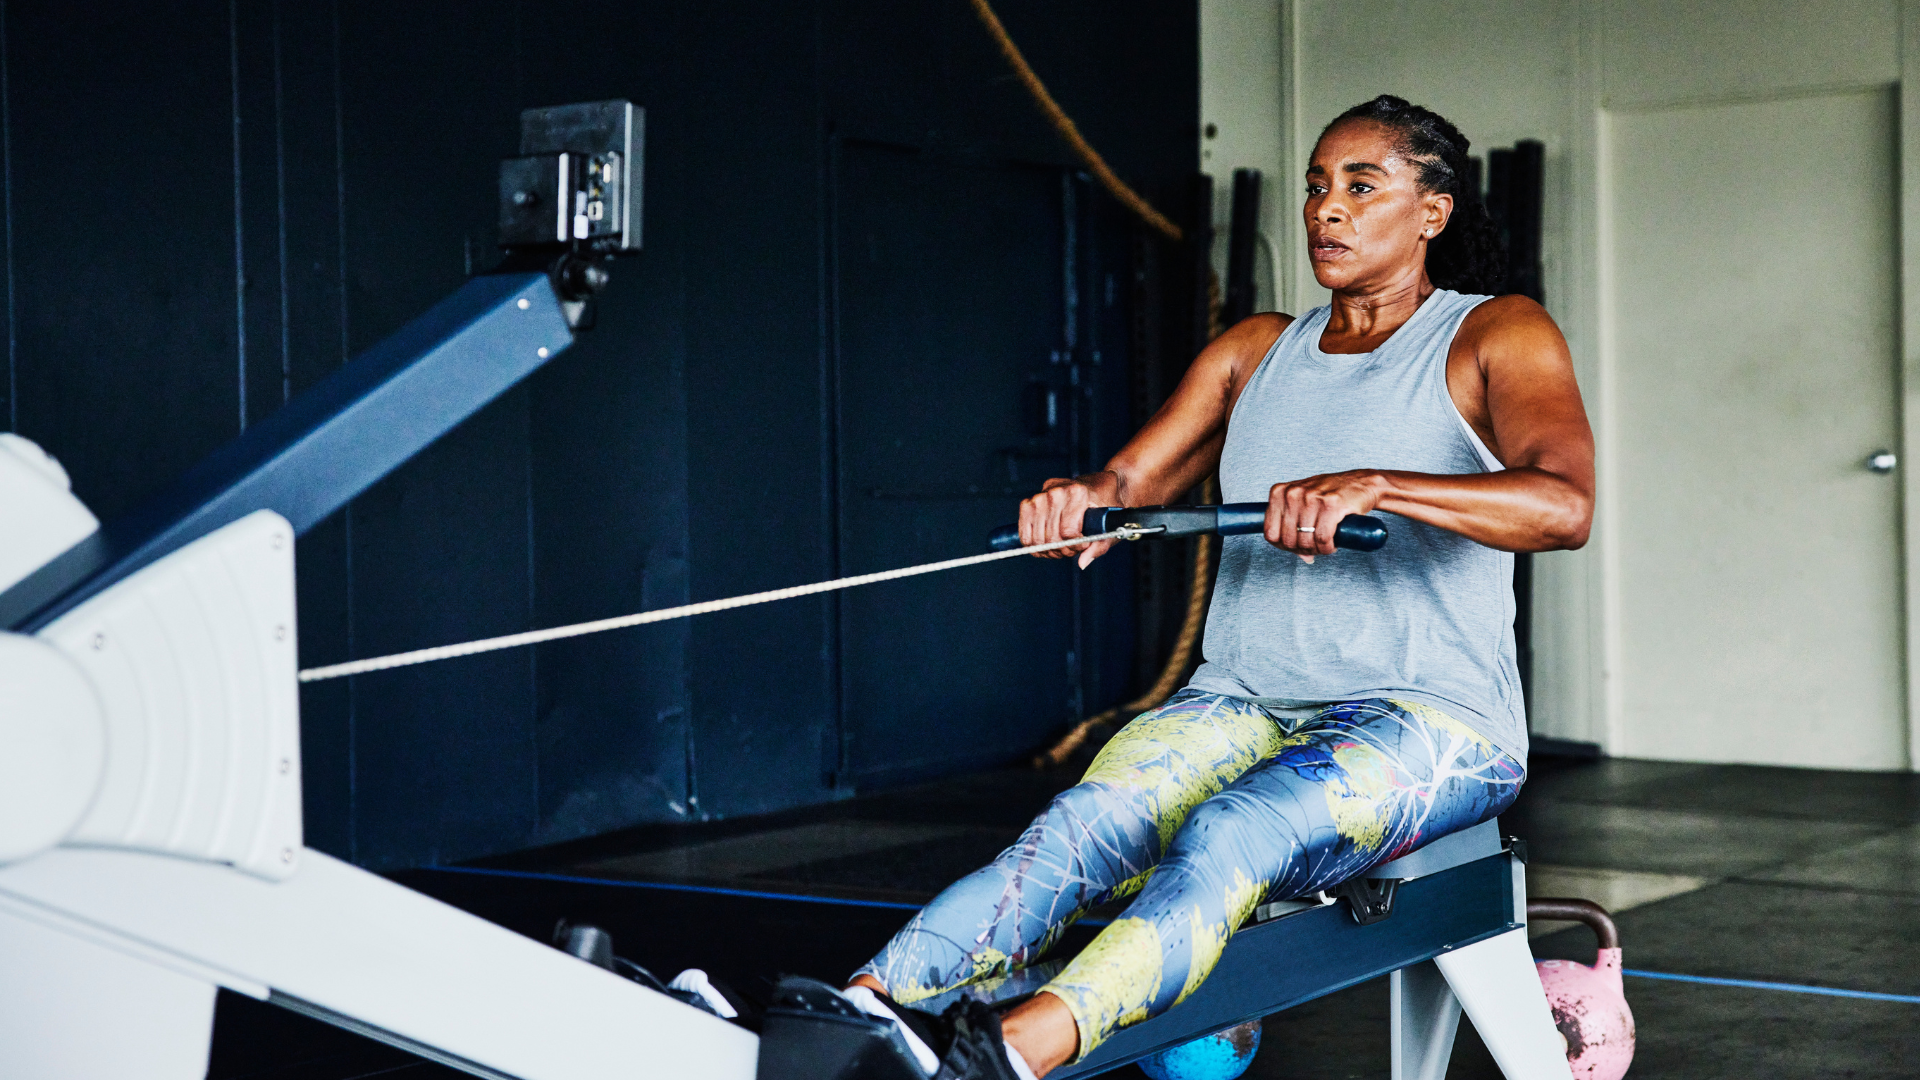 5 reasons you should be adding the rowing machine to your workouts